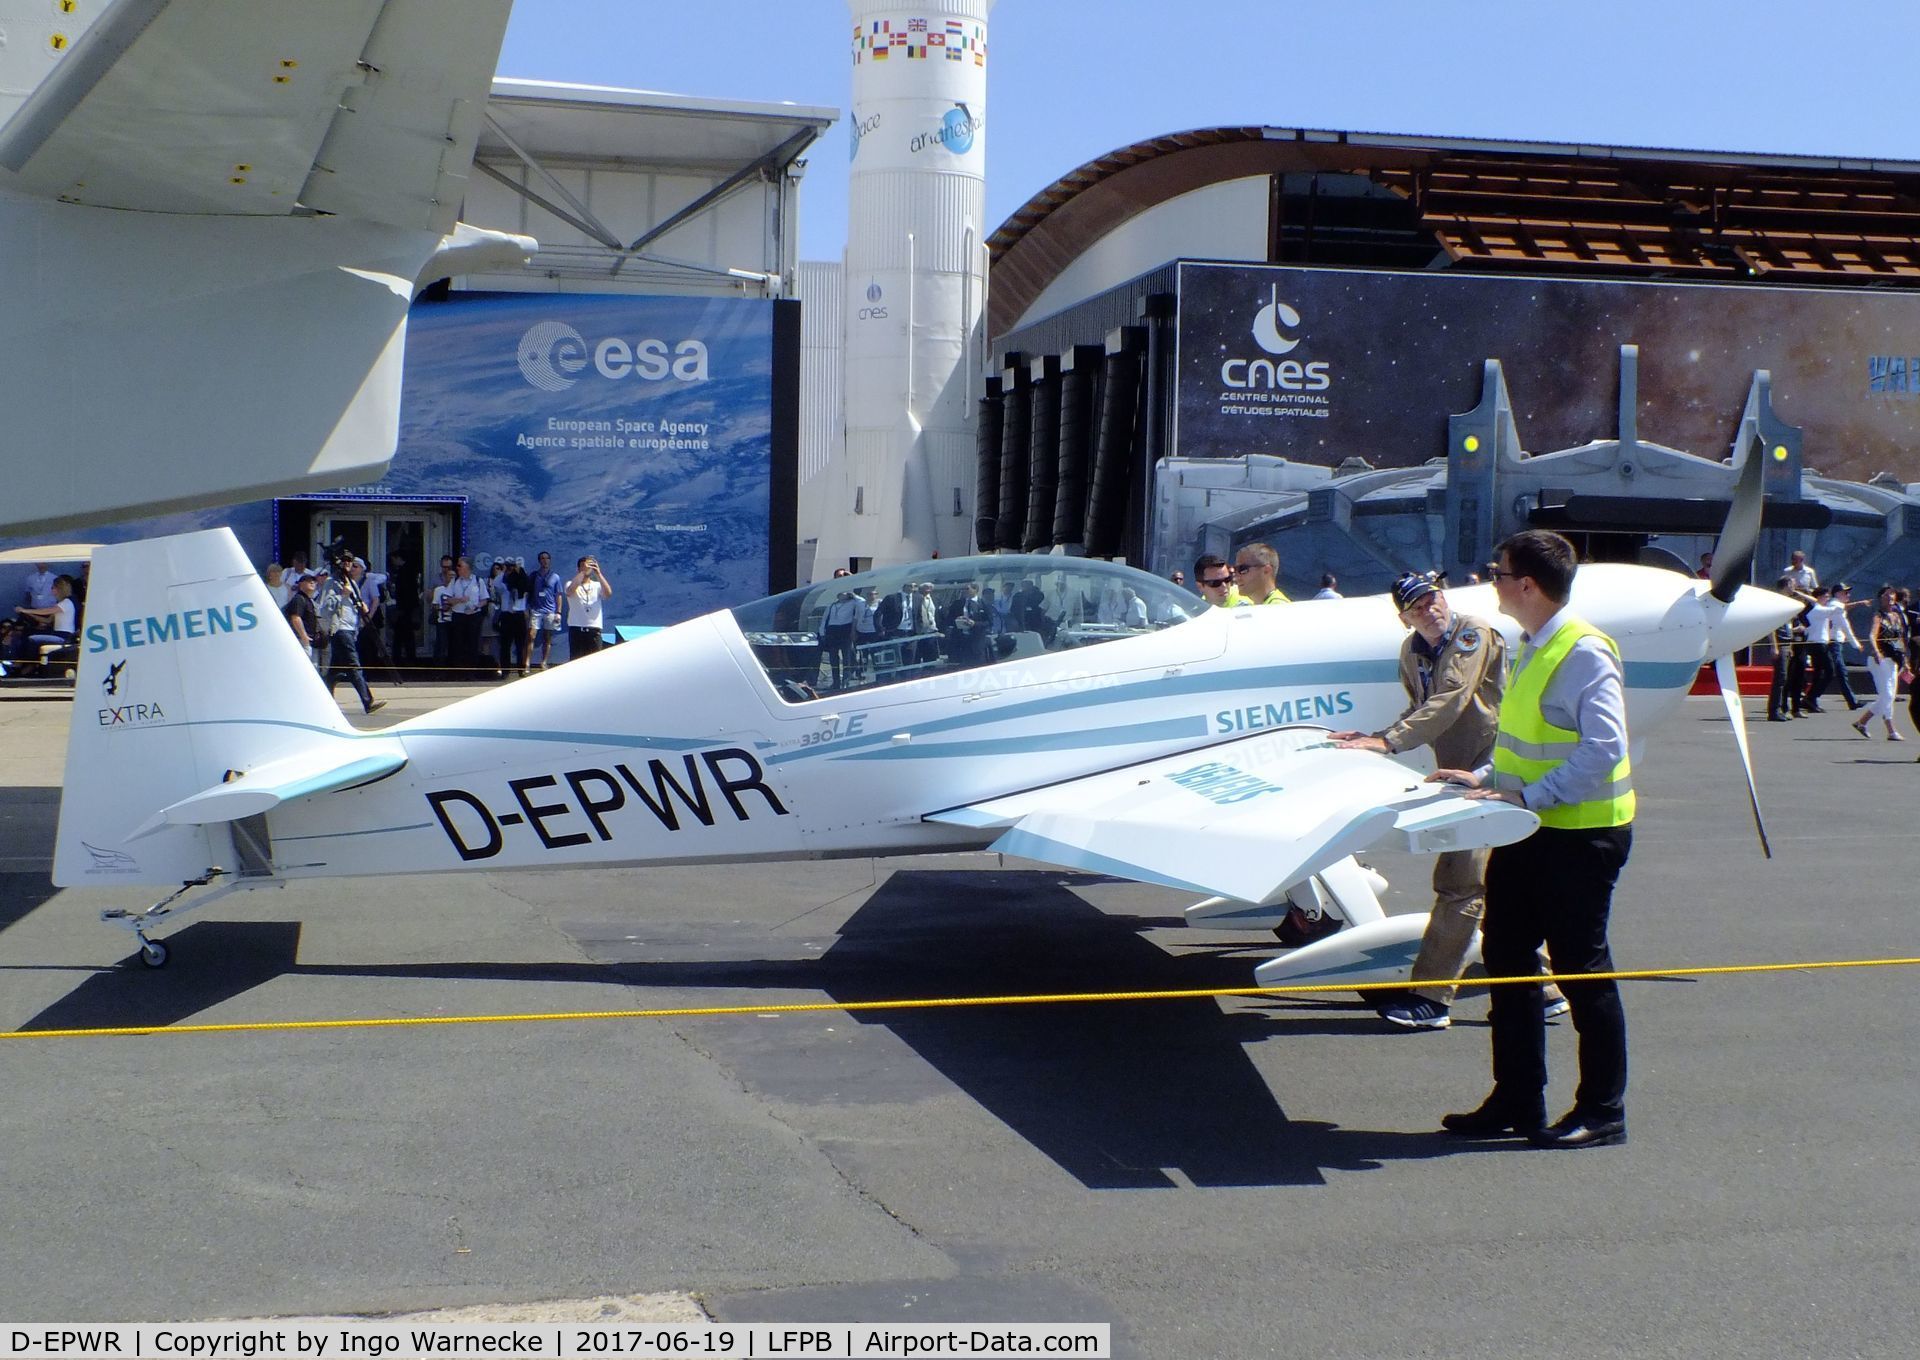 D-EPWR, 2016 Extra EA-330LE C/N Not found D-EPWR, Extra EA-330LE with Siemens electric motor at the Aerosalon 2017, Paris